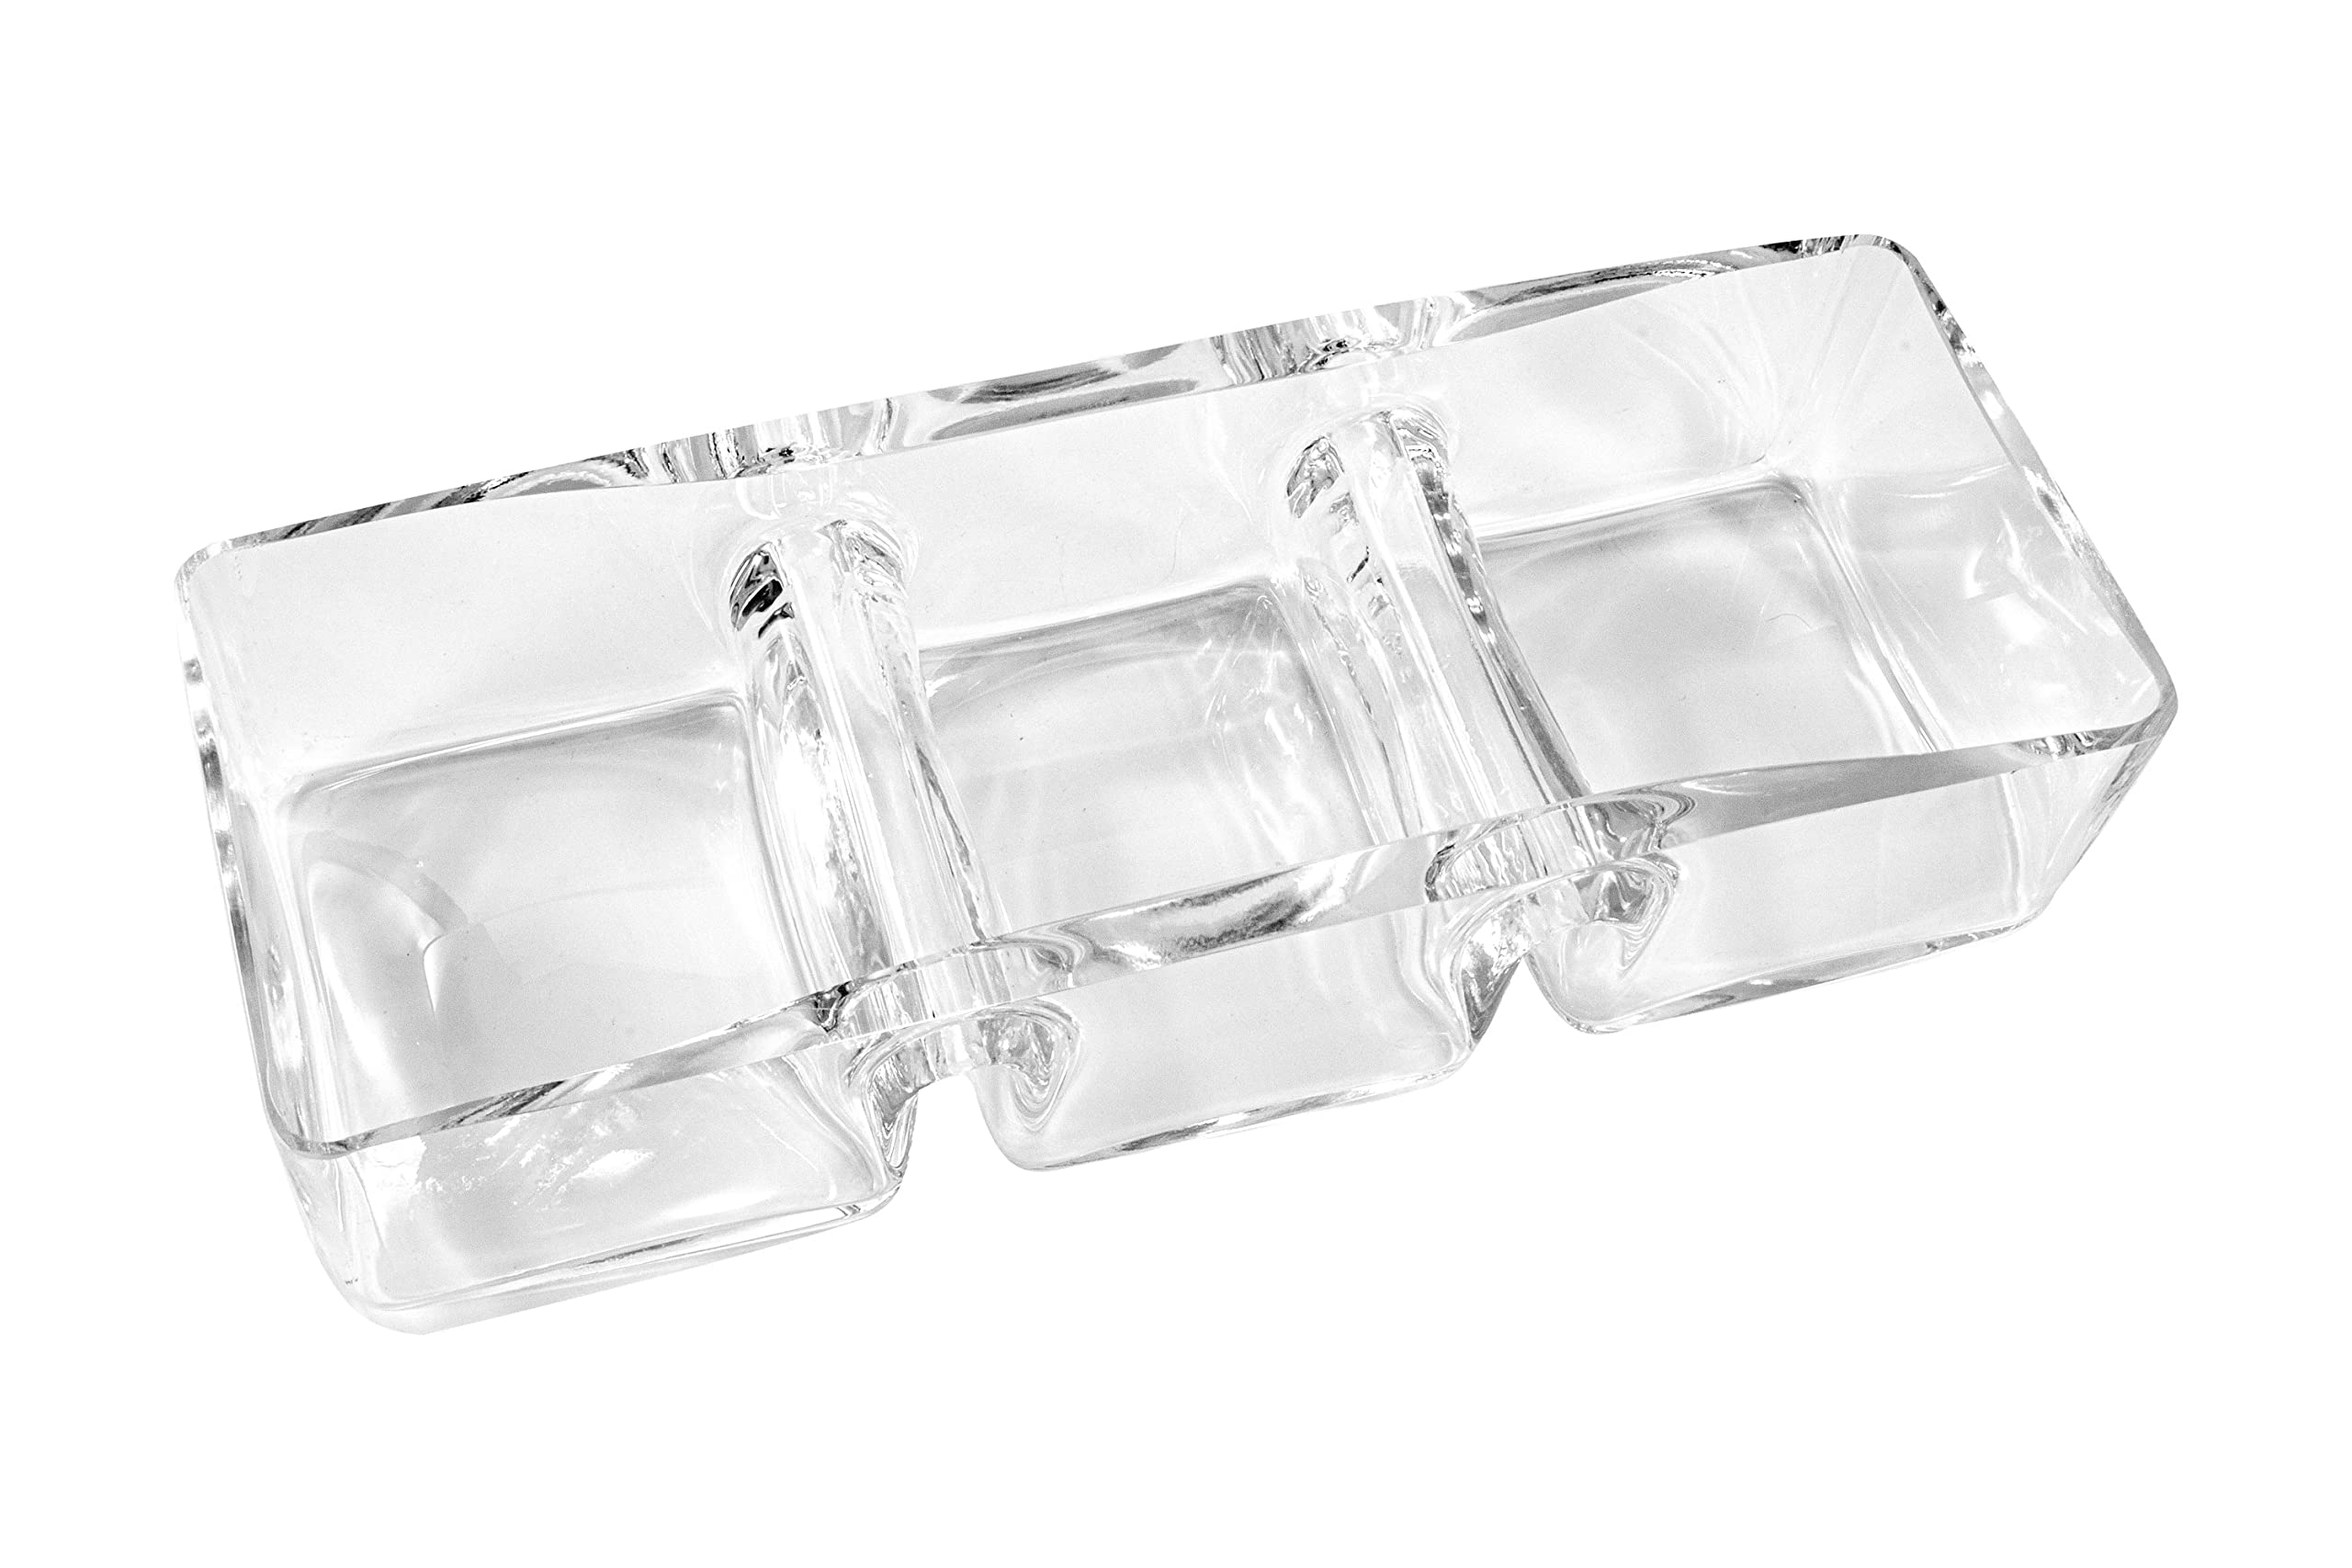 Glass - Sectional - Relish - Divided -Dish - Tray - 3 Part - Rectangular - for Nuts, Chocolate, Fruit or Candies - 12" Long - Made in Europe - by Barski